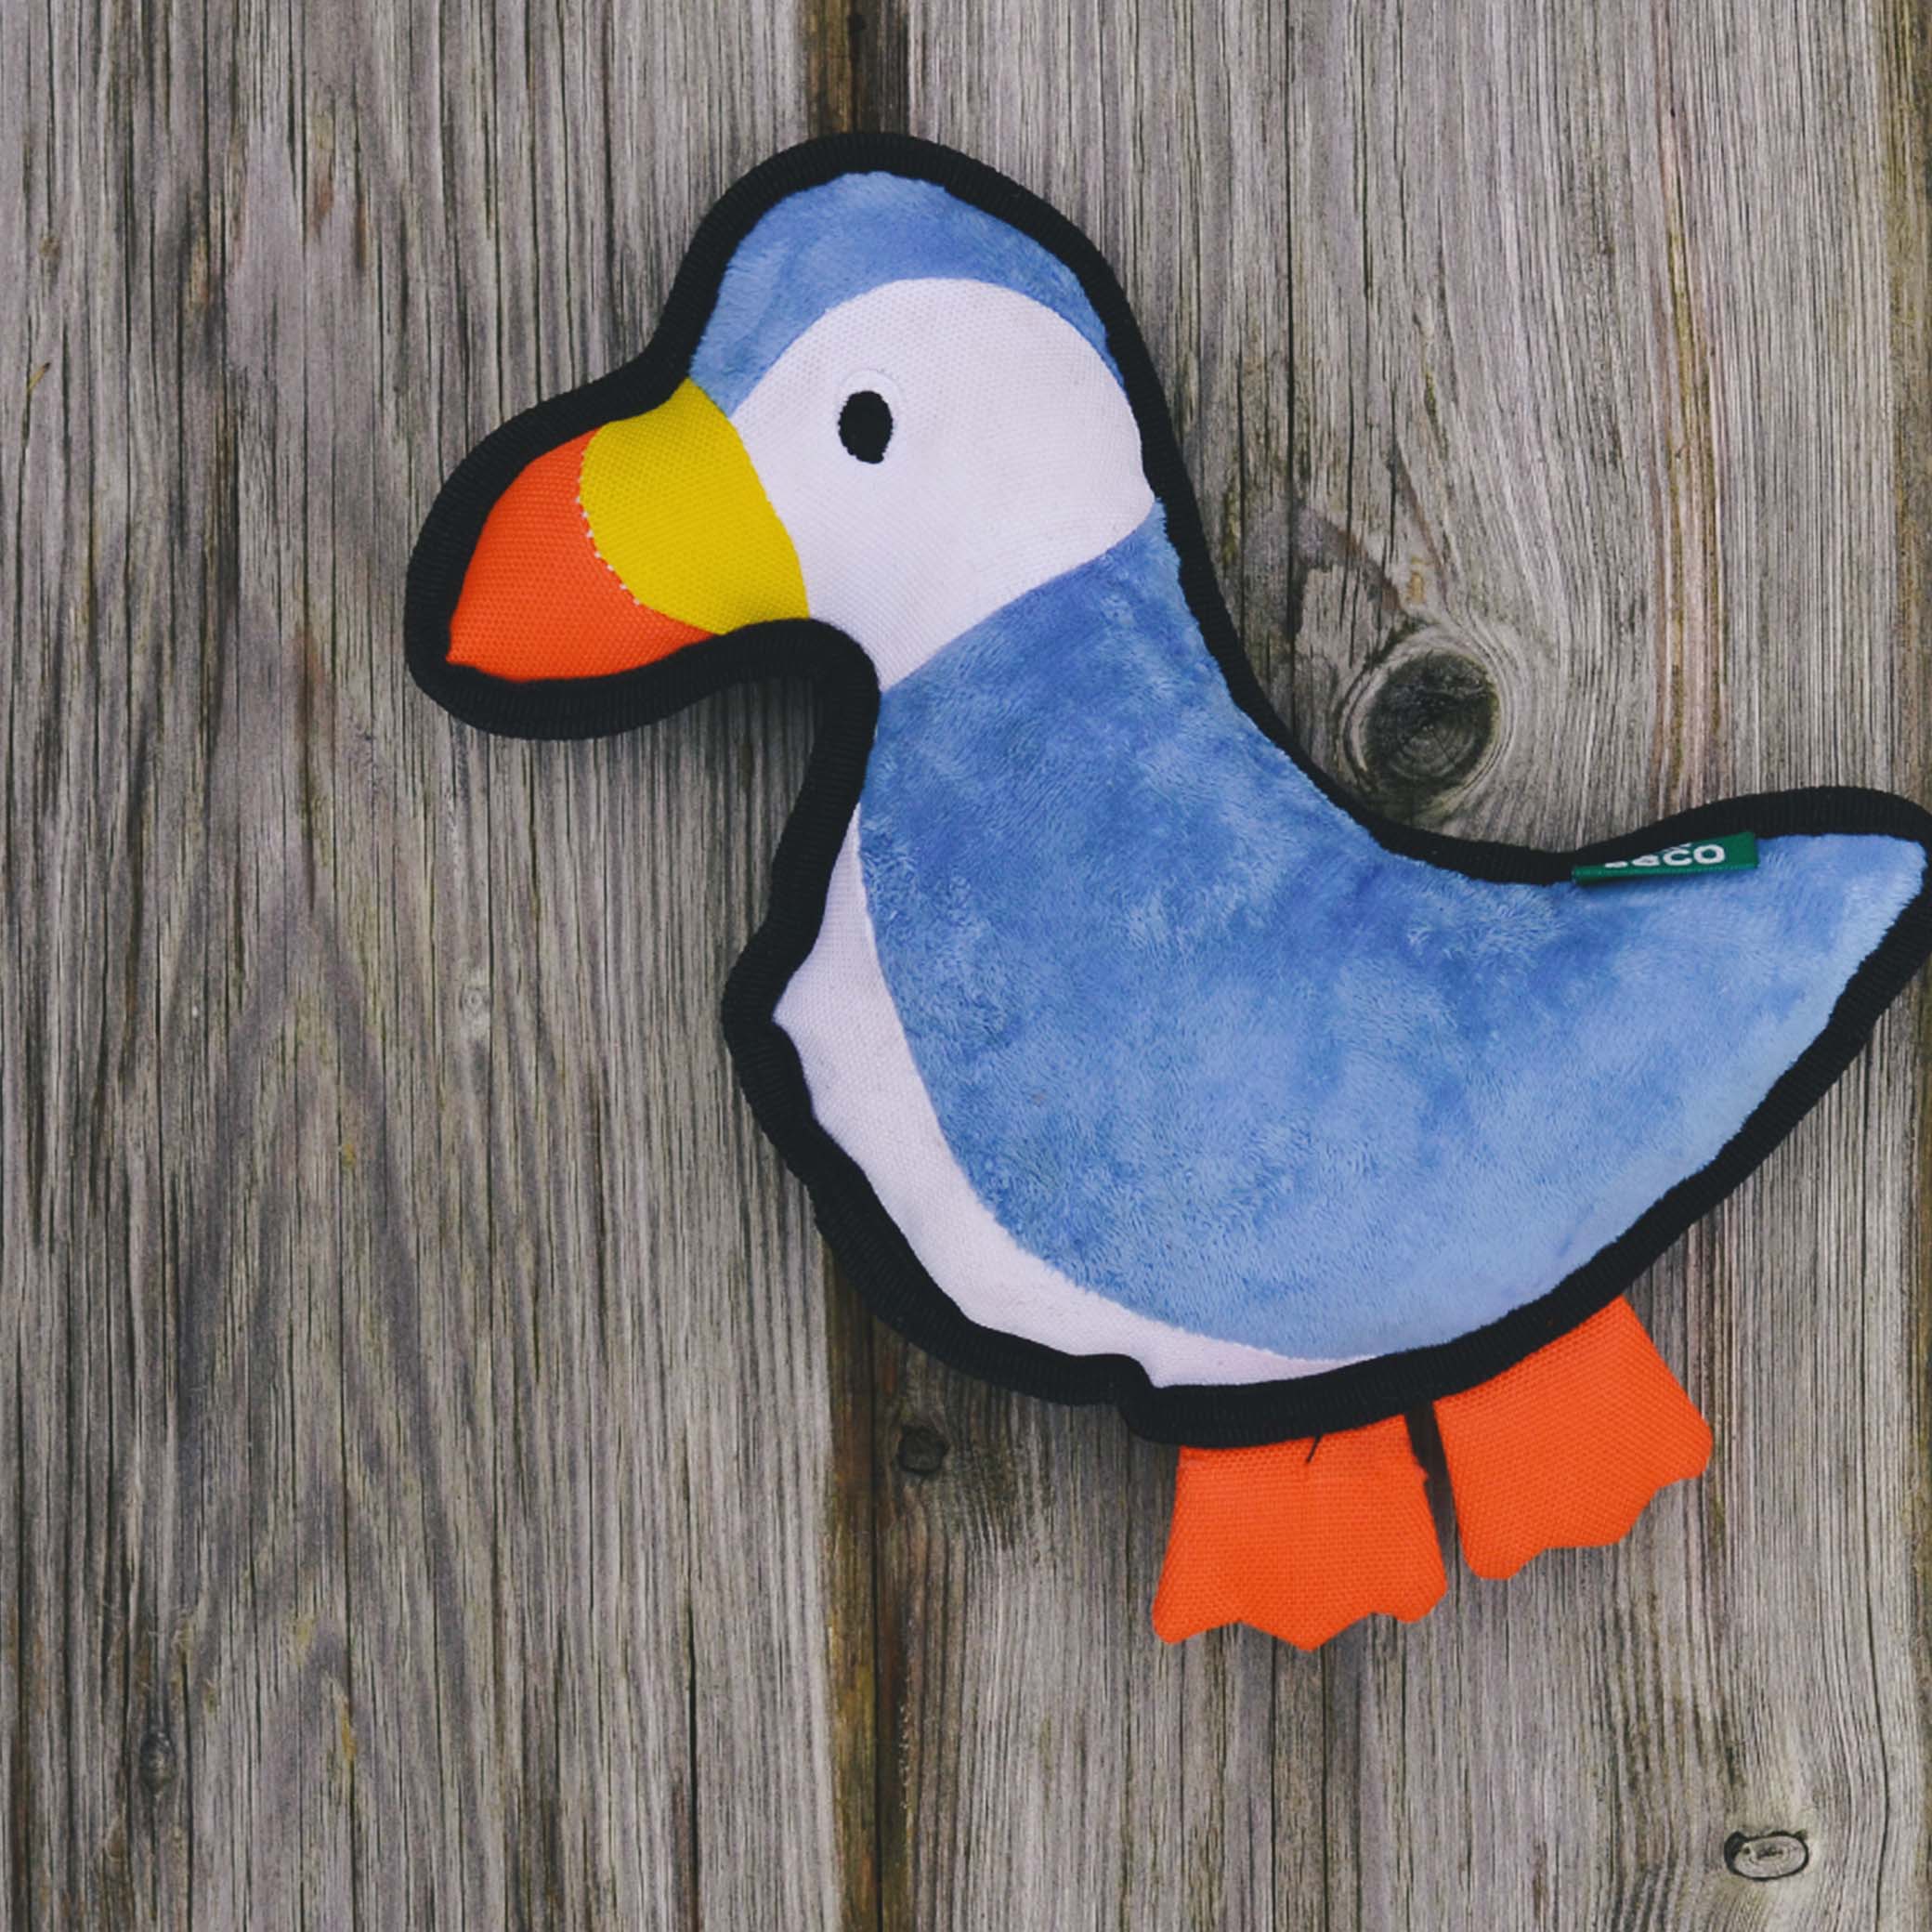 Rough & Tough Recycled Plastic Puffin Dog Toy (7461402509554)